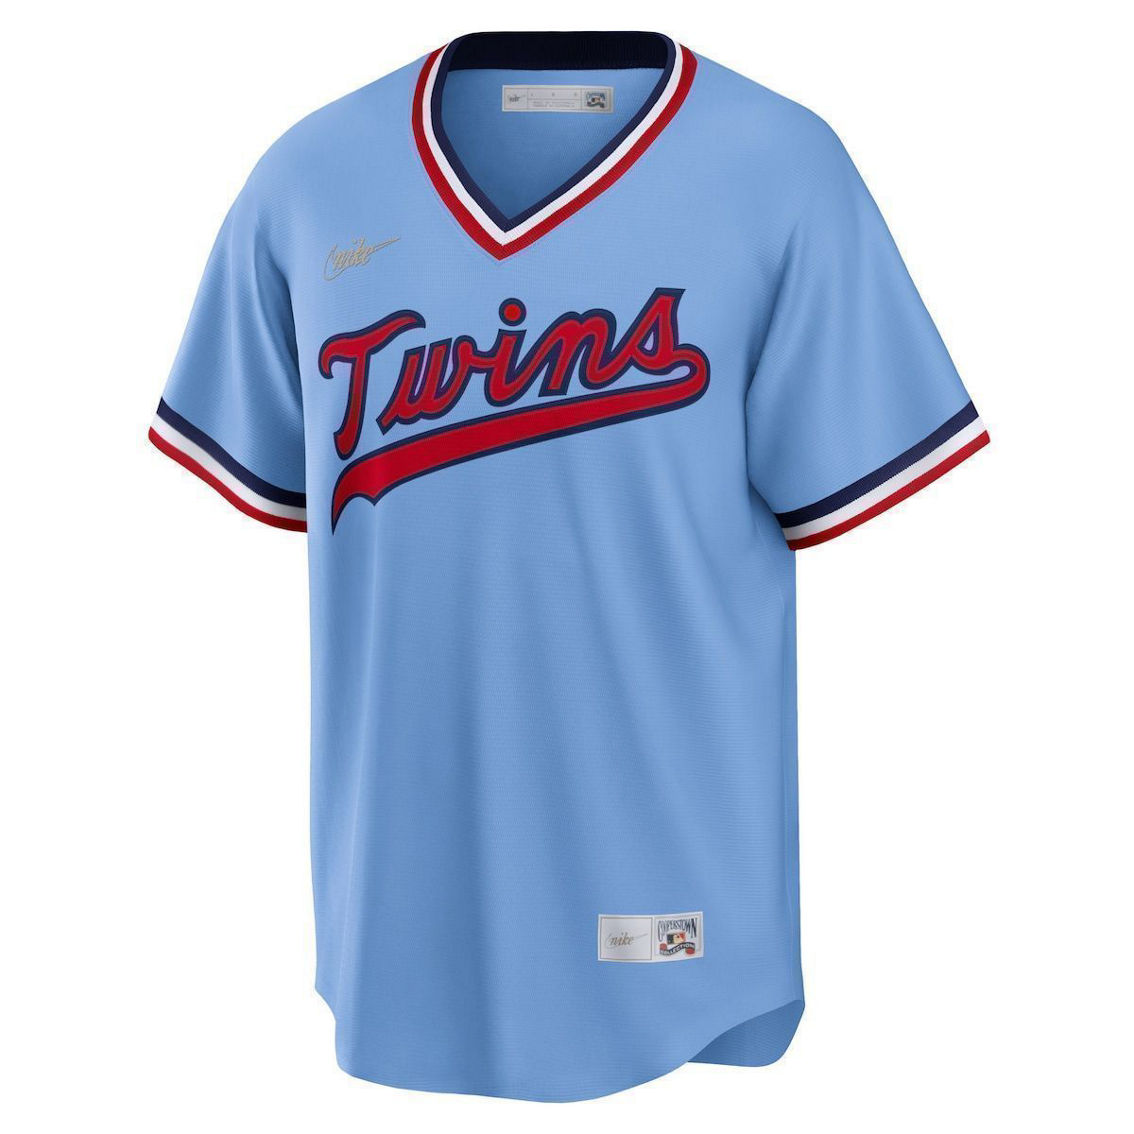 Nike Men's Light Blue Minnesota Twins Road Cooperstown Collection Team Jersey - Image 3 of 4